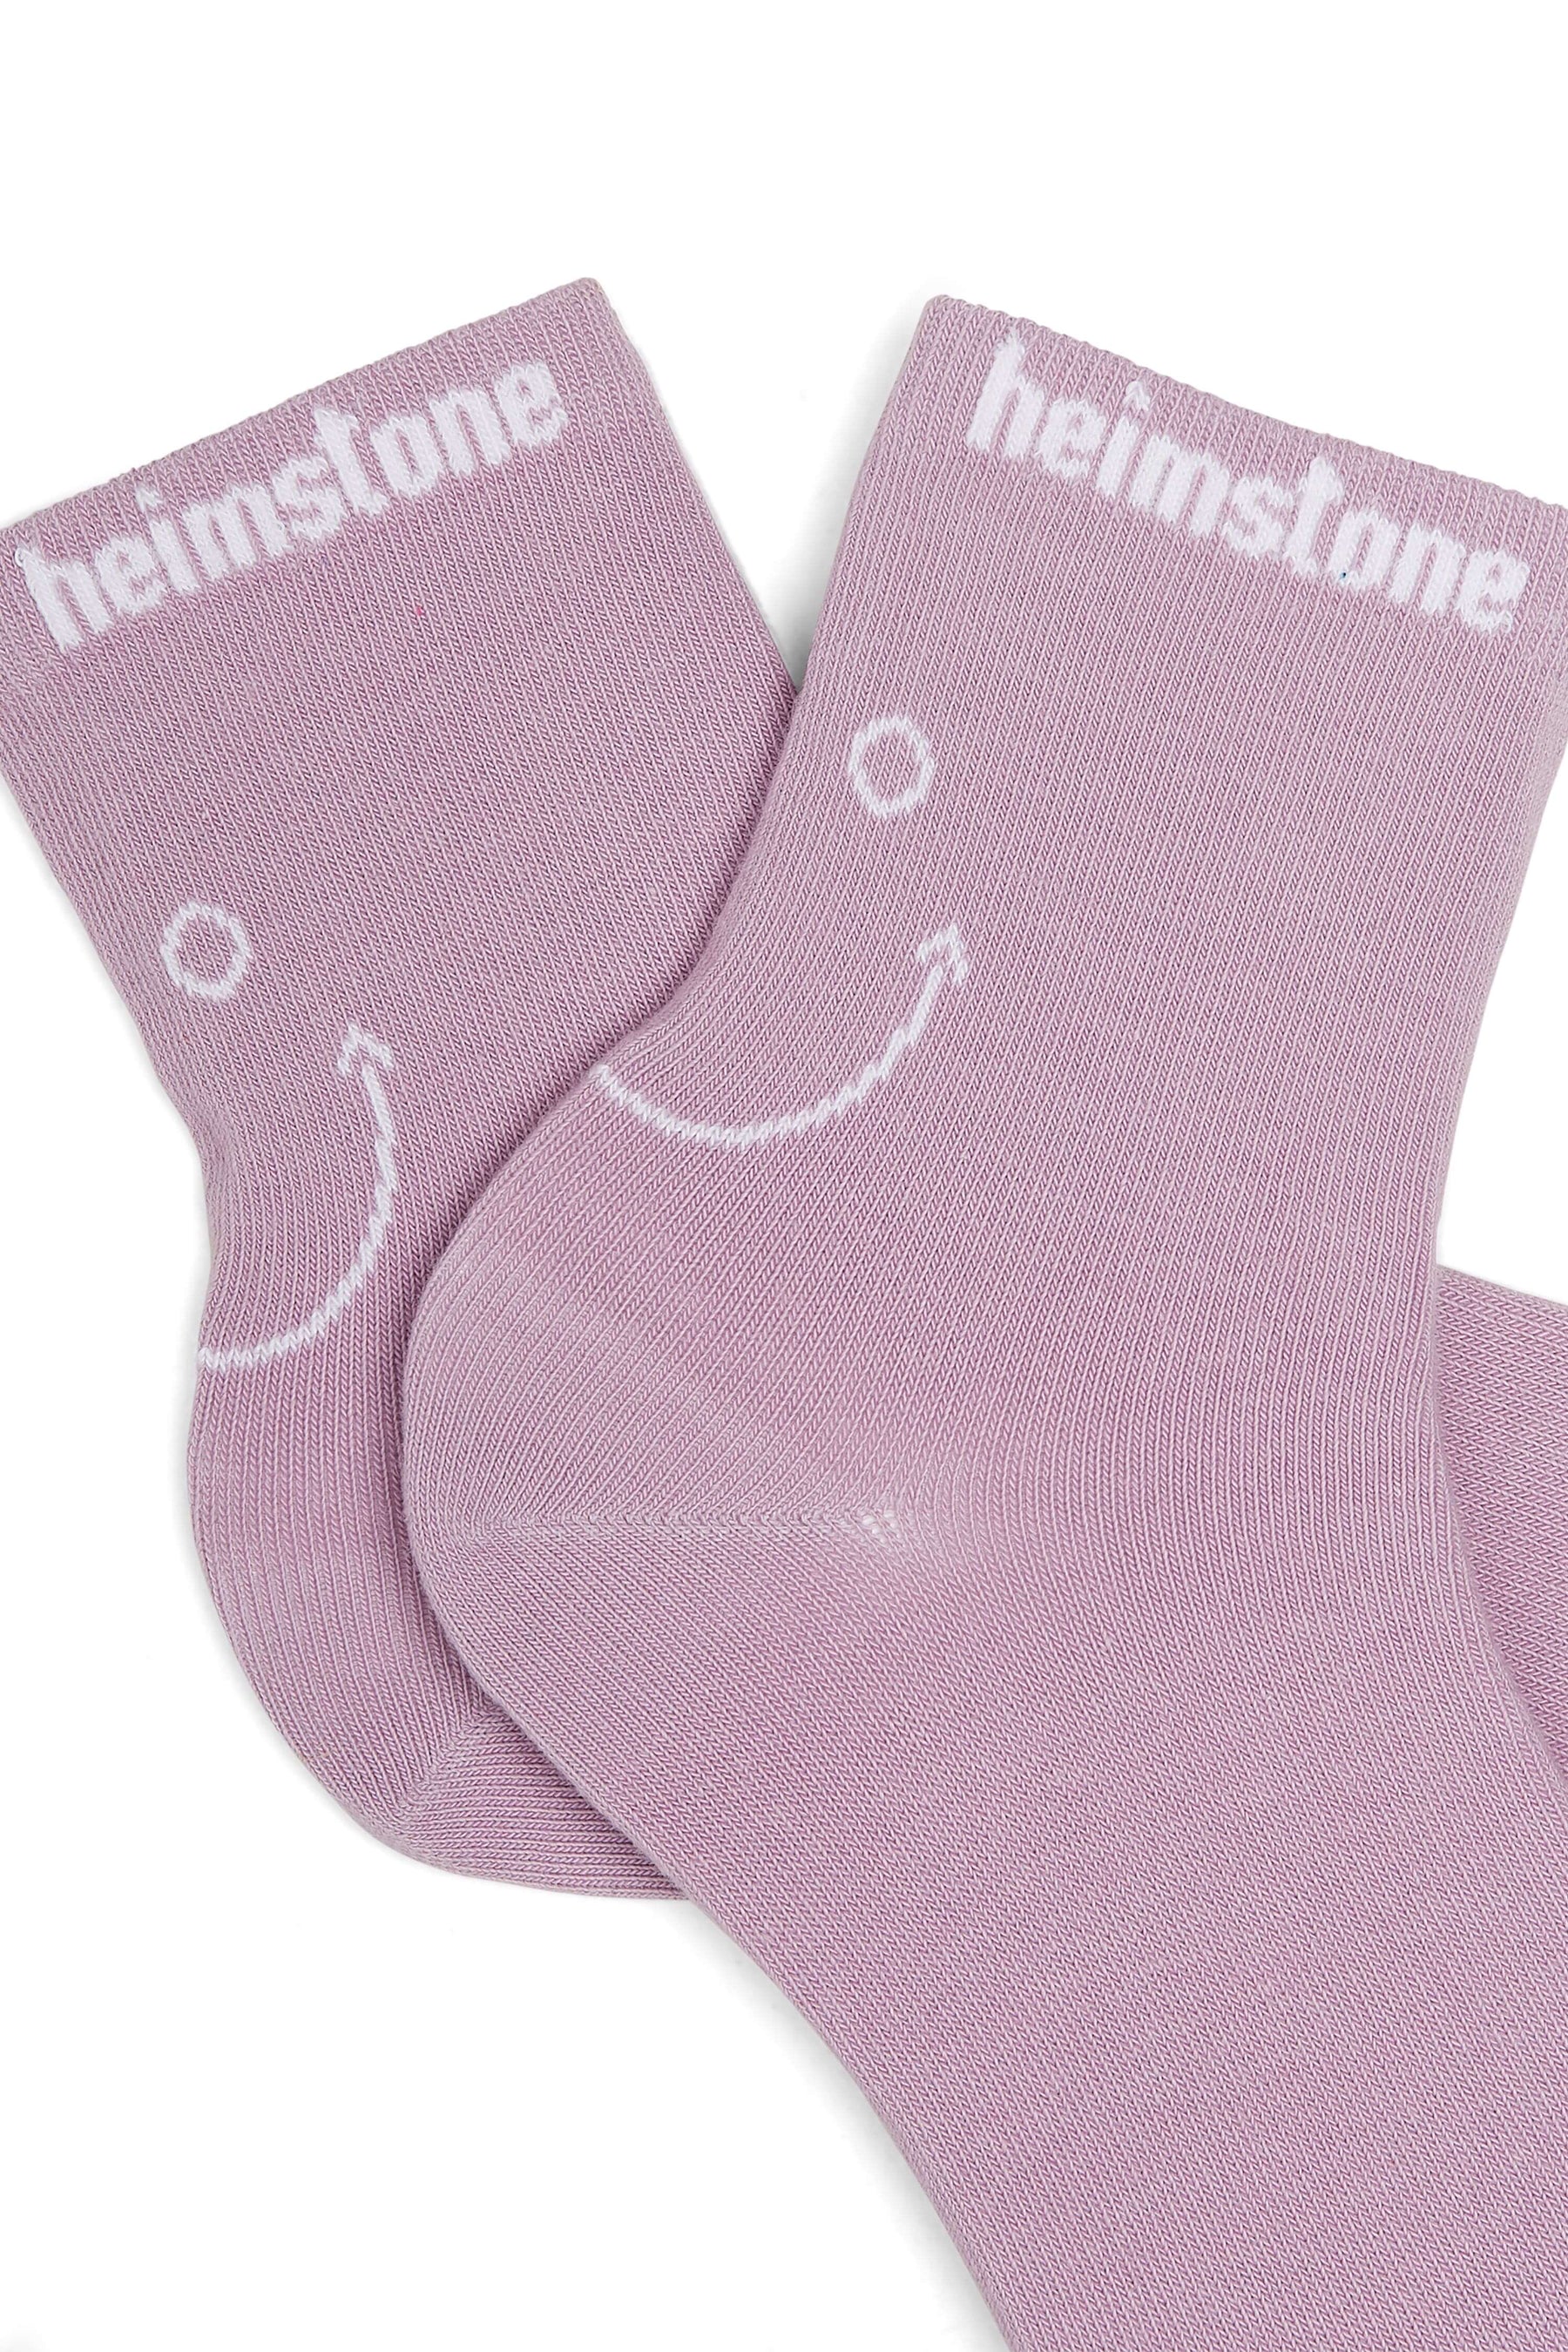 Ankle socks in lilac Smiley | Heimstone